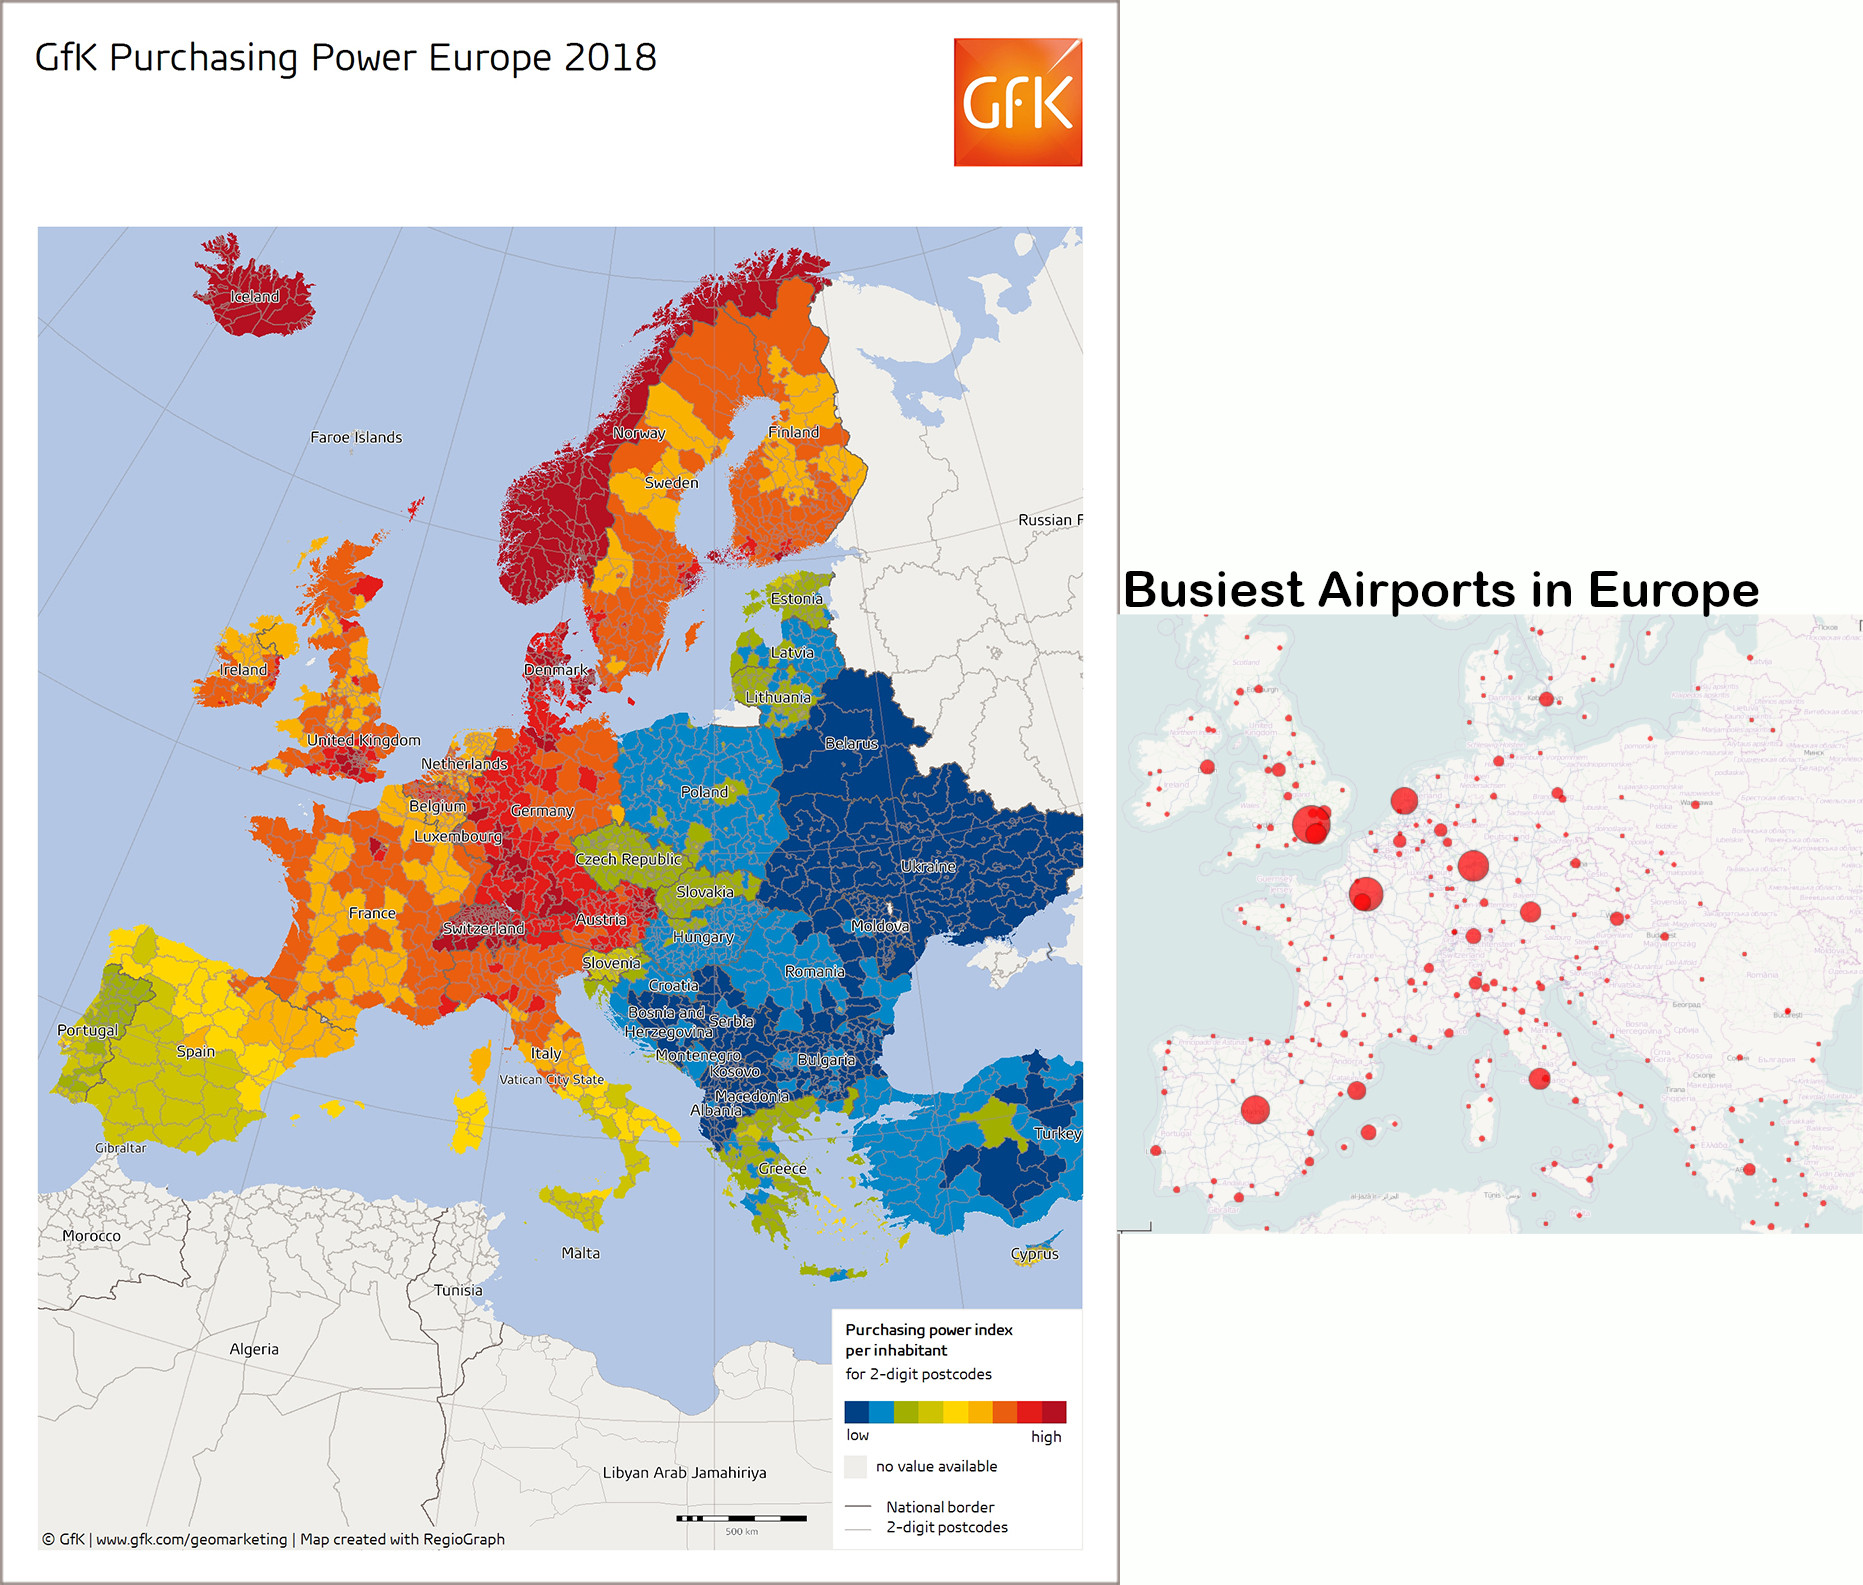 Maps of GFK Purchasing Power Europe 2018 and Wikiepedia Busiest Airports in Europe